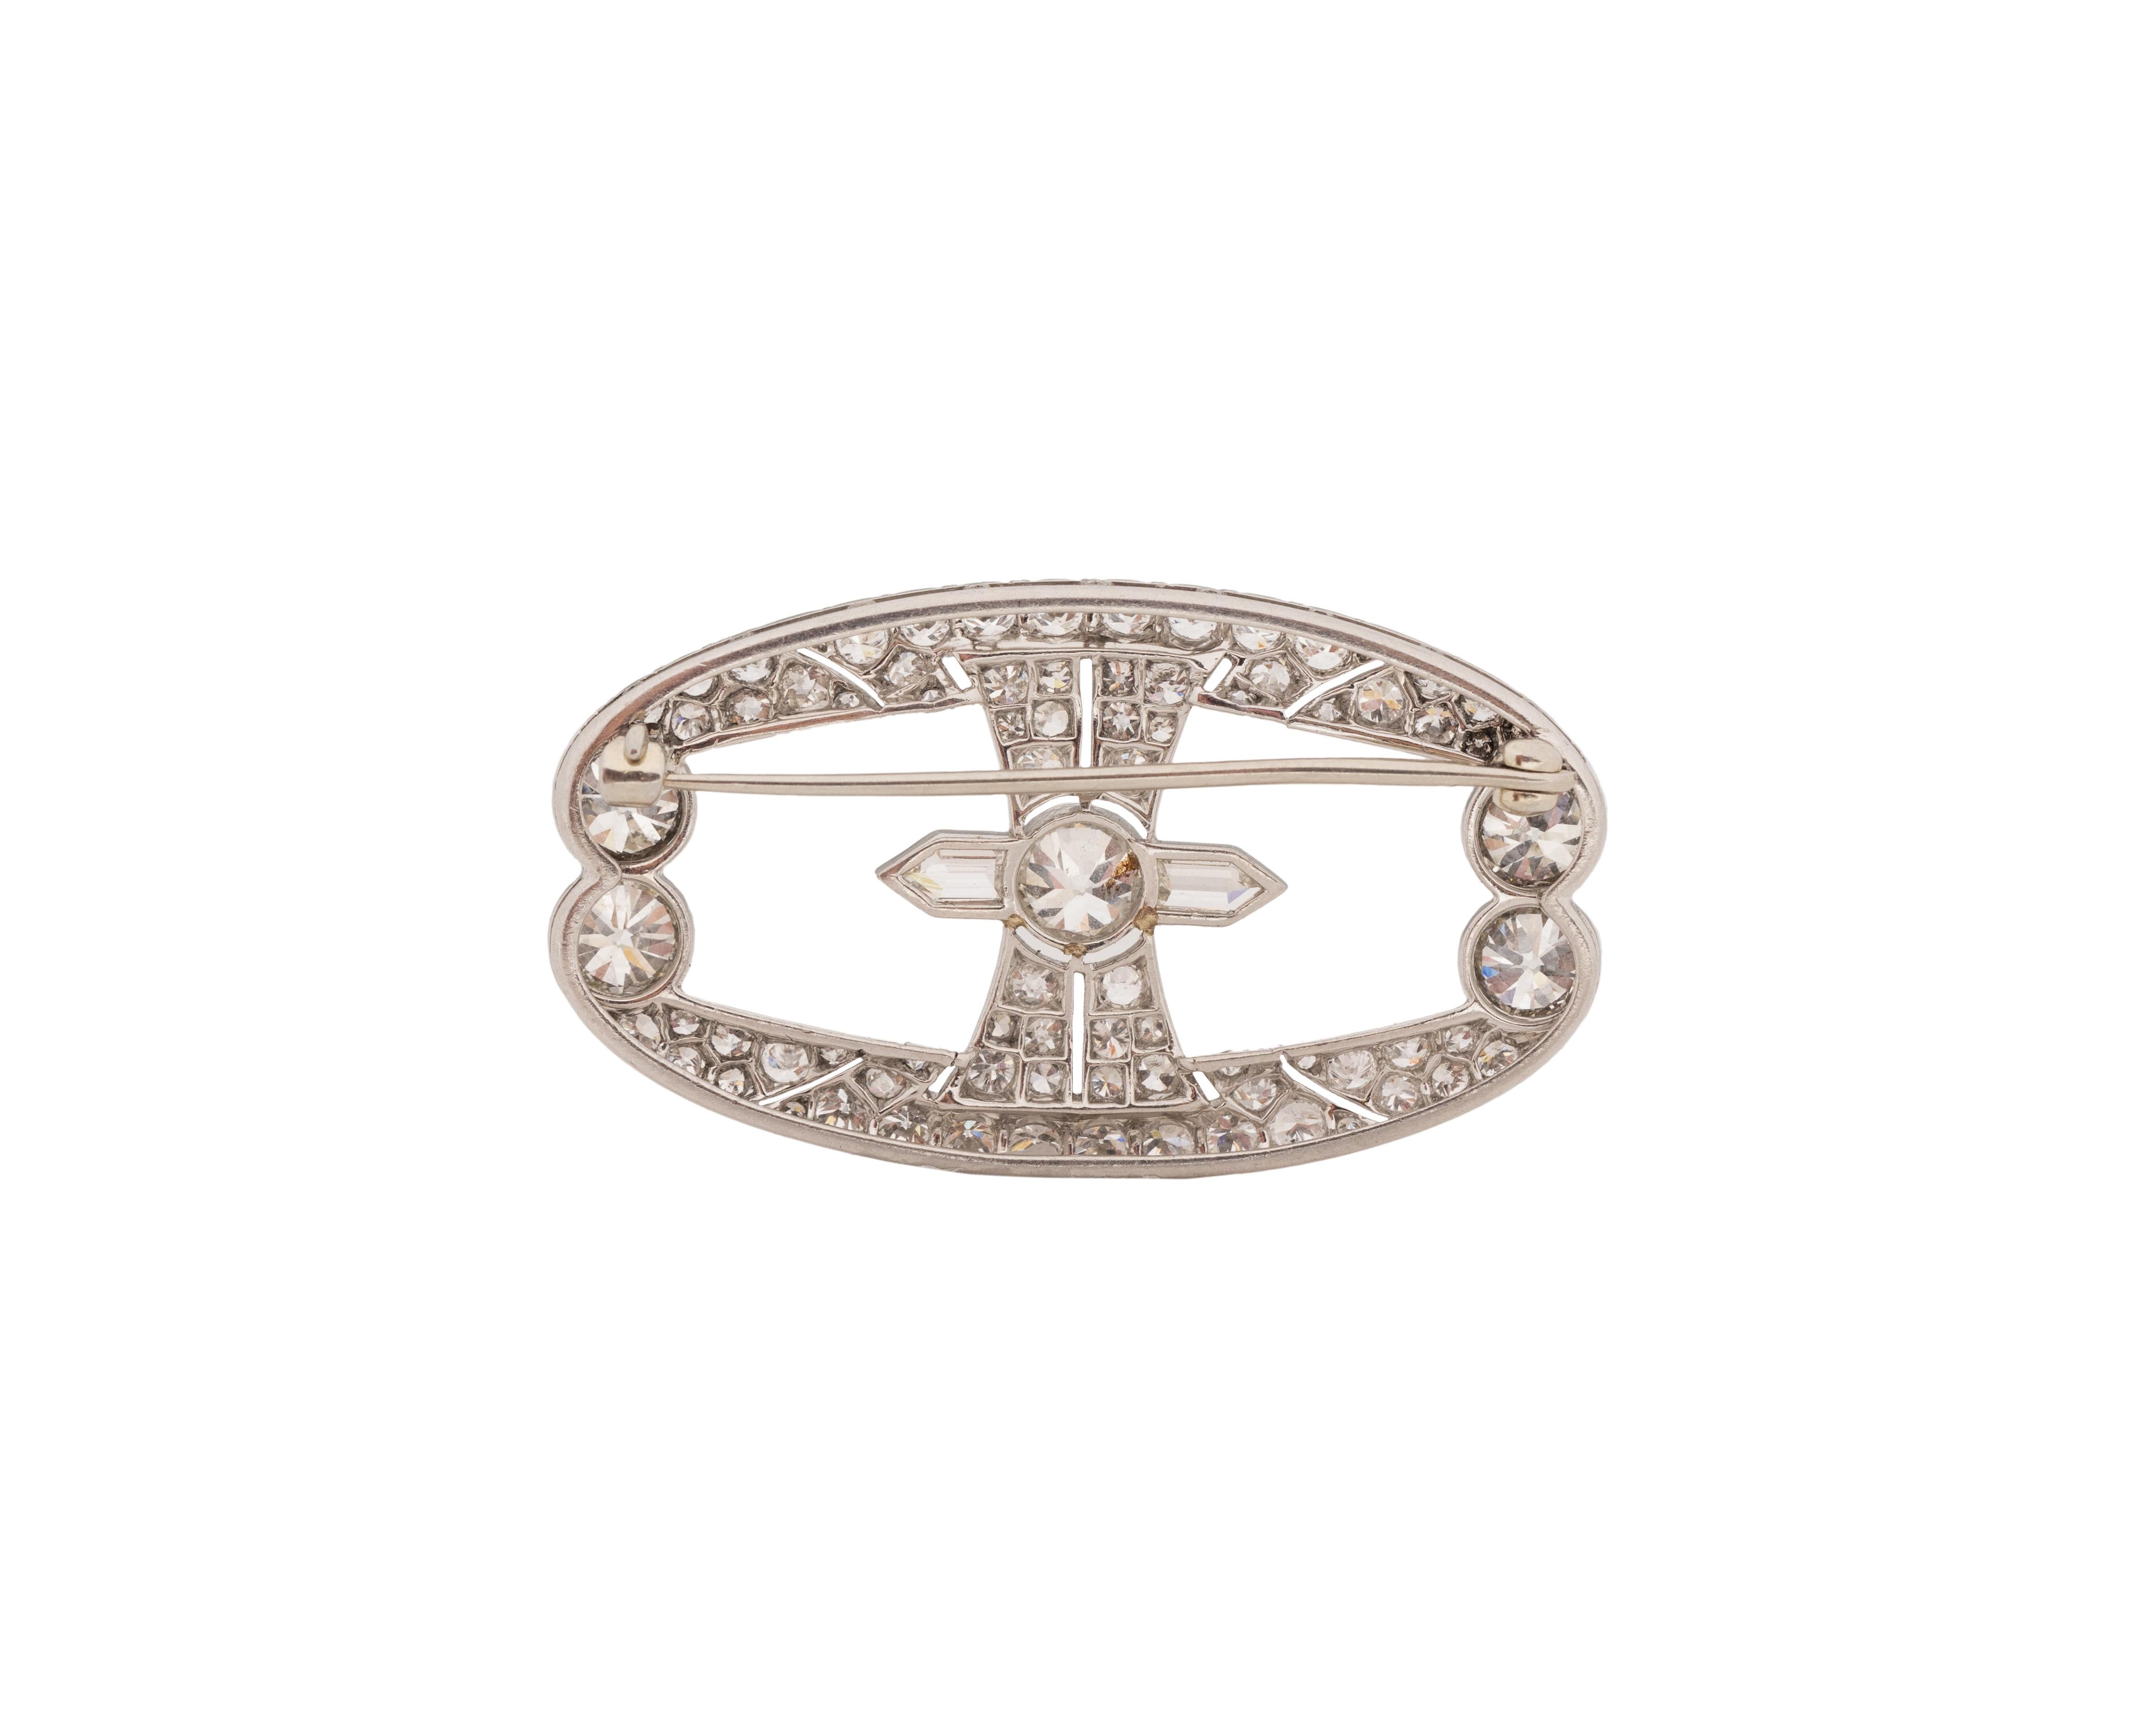 An exceptional and authentic Art Deco brooch. Featuring the quintessential vintage European cuts. Featuring some of the purest white in color antique cuts we have come across and unique shape stones flanking the center stone. A true antique one of